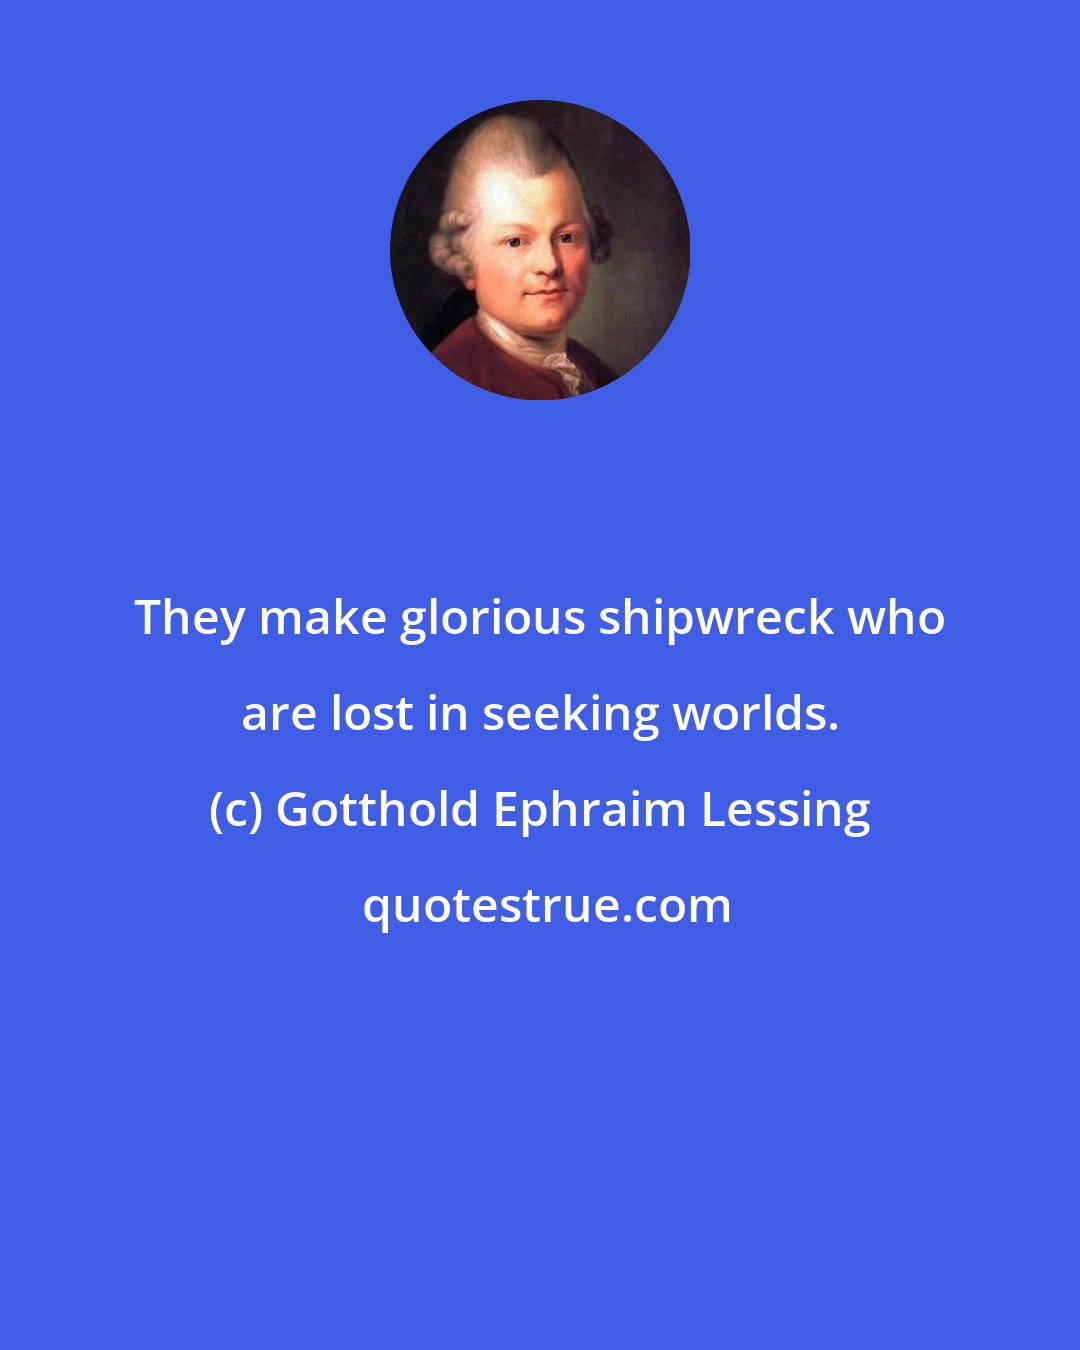 Gotthold Ephraim Lessing: They make glorious shipwreck who are lost in seeking worlds.